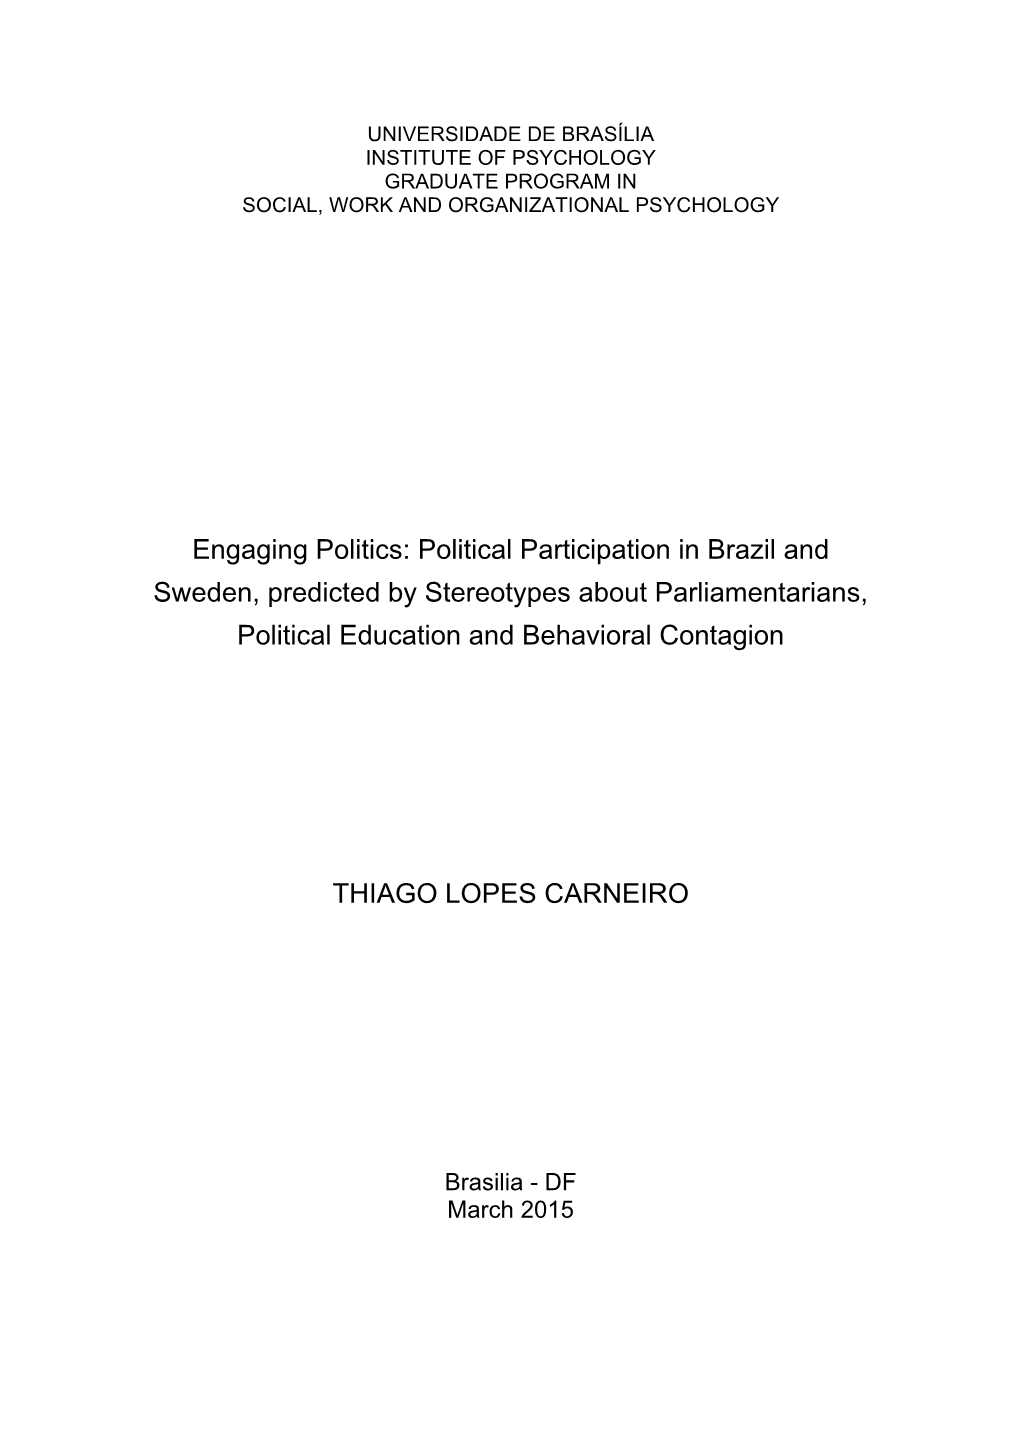 Political Participation in Brazil and Sweden, Predicted by Stereotypes About Parliamentarians, Political Education and Behavioral Contagion